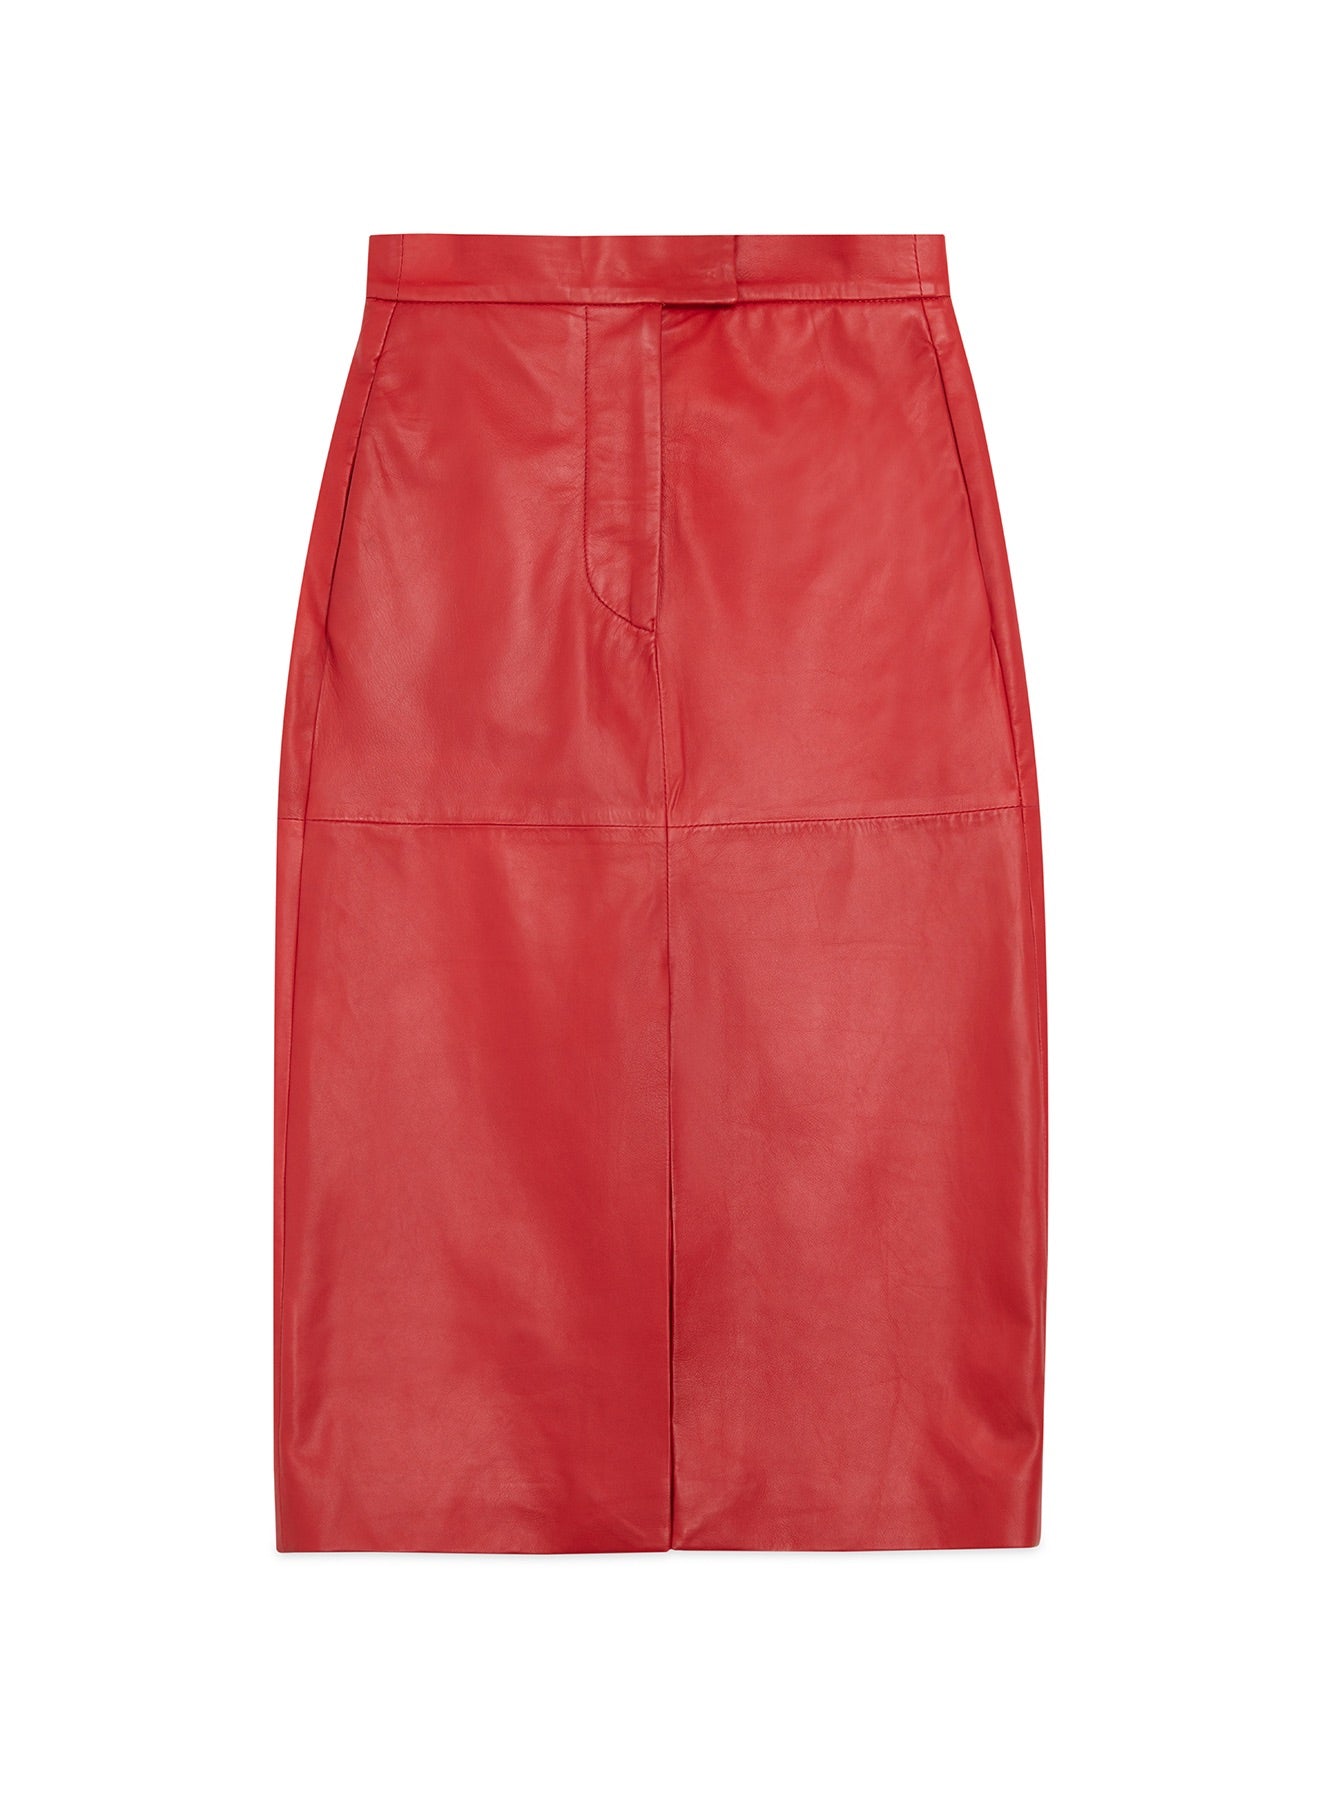 Red Leather Midi Skirt